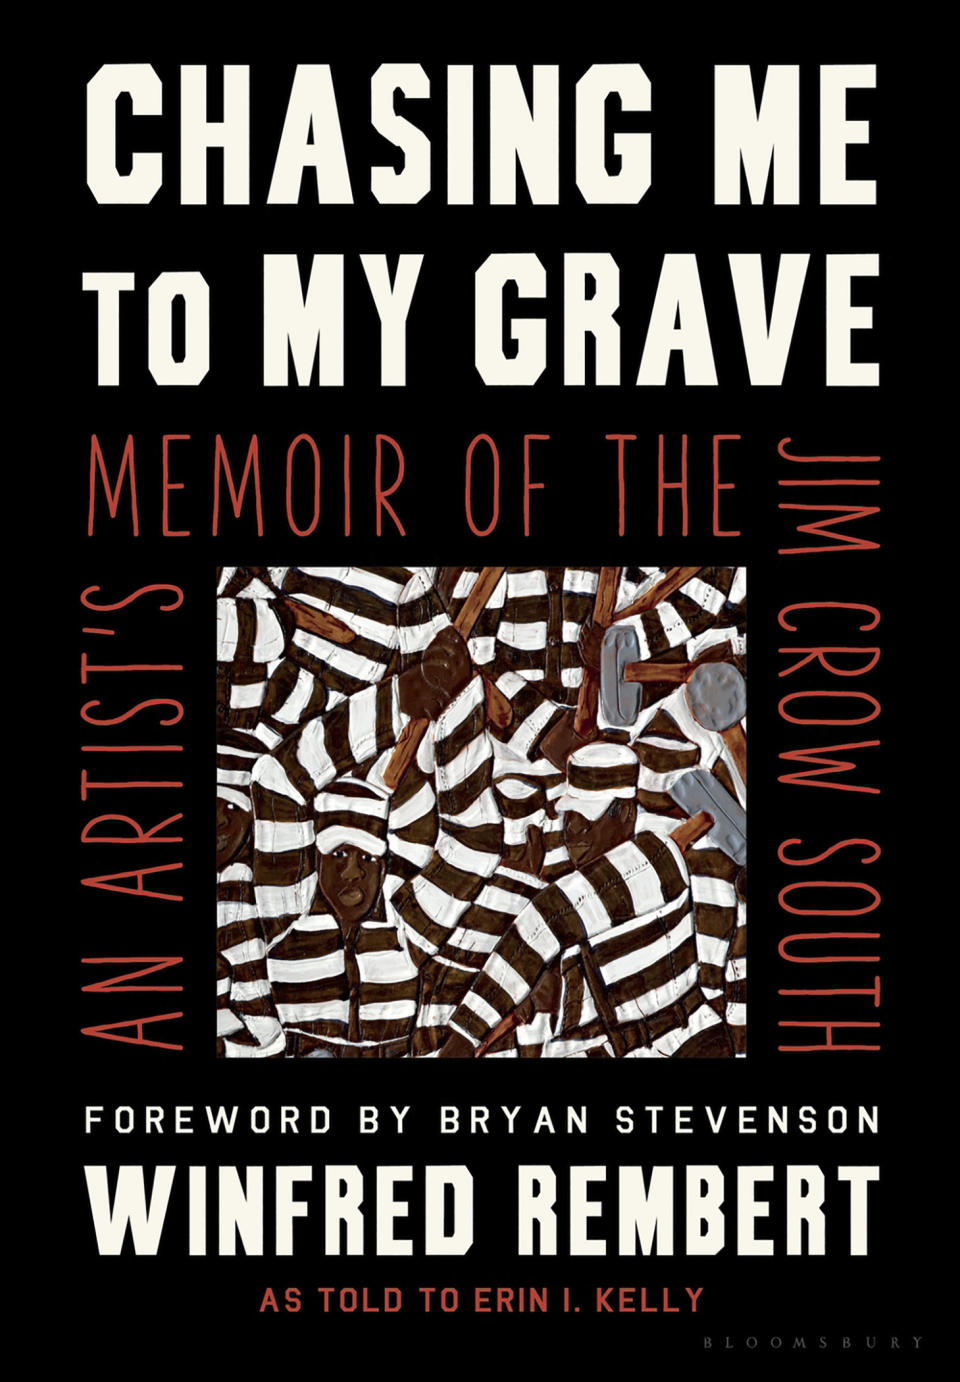 This cover image released by Bloomsbury shows "Chasing Me to My Grave: An Artist's Memoir of the Jim Crow South" by Winfred Rembert, winner of the Pulitzer Prize for Biography. (Bloomsbury via AP)